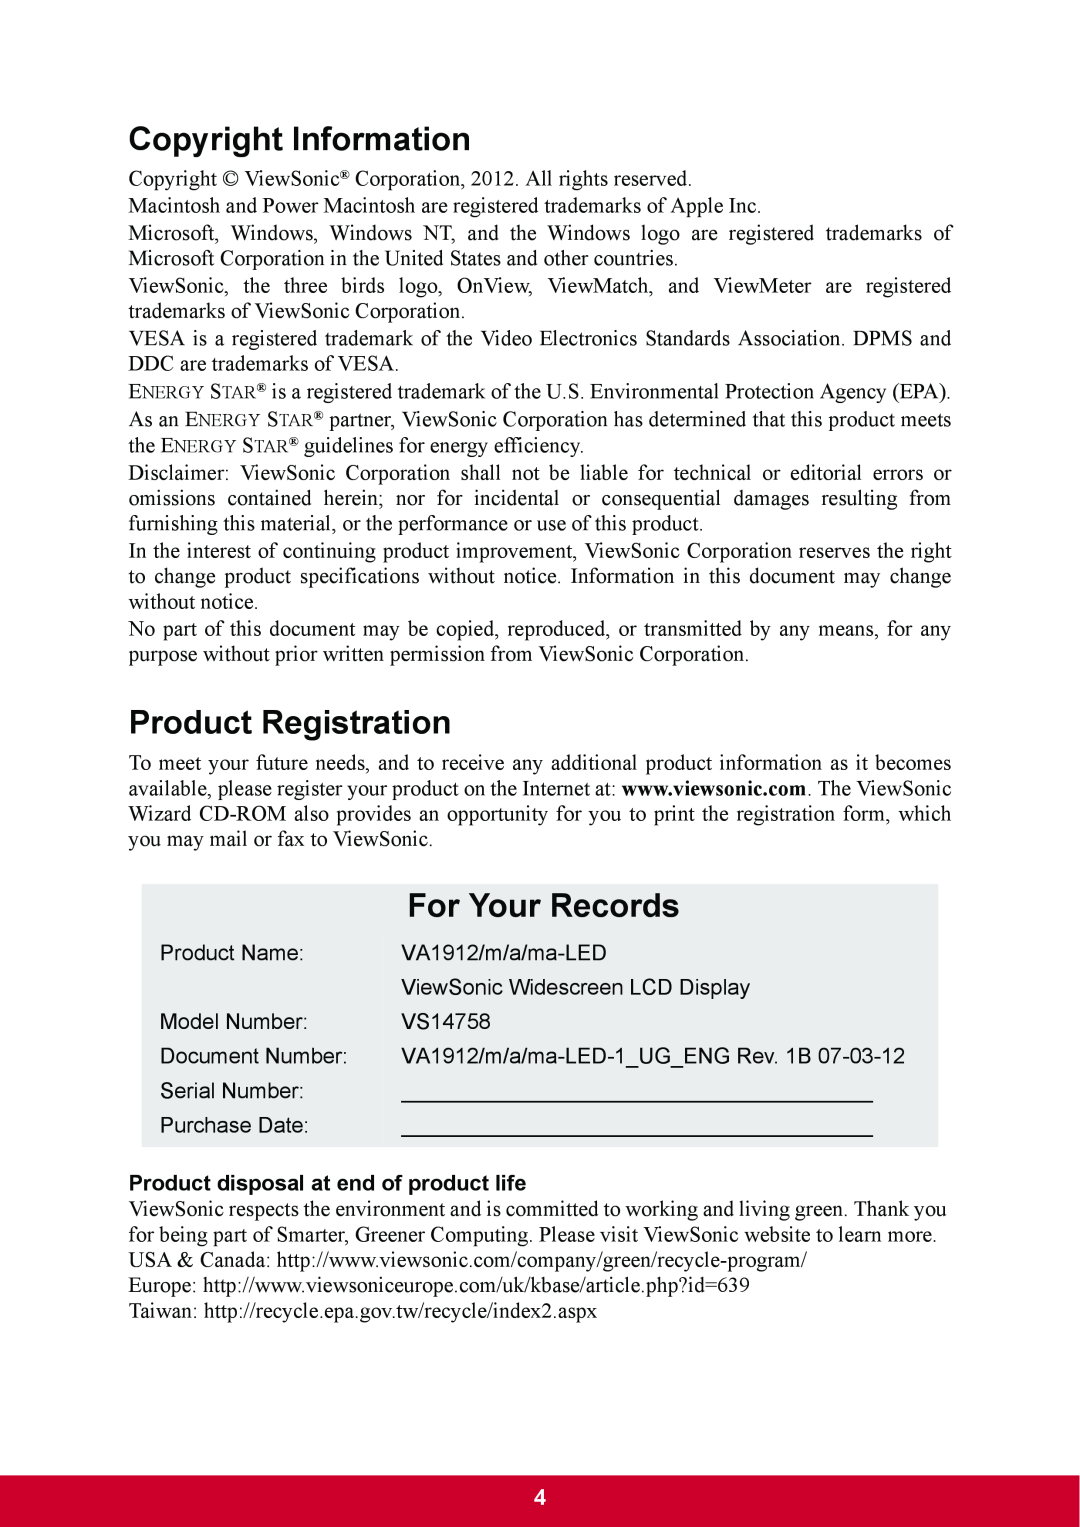 ViewSonic VA1912m-LED warranty Copyright Information, Product Registration, For Your Records 